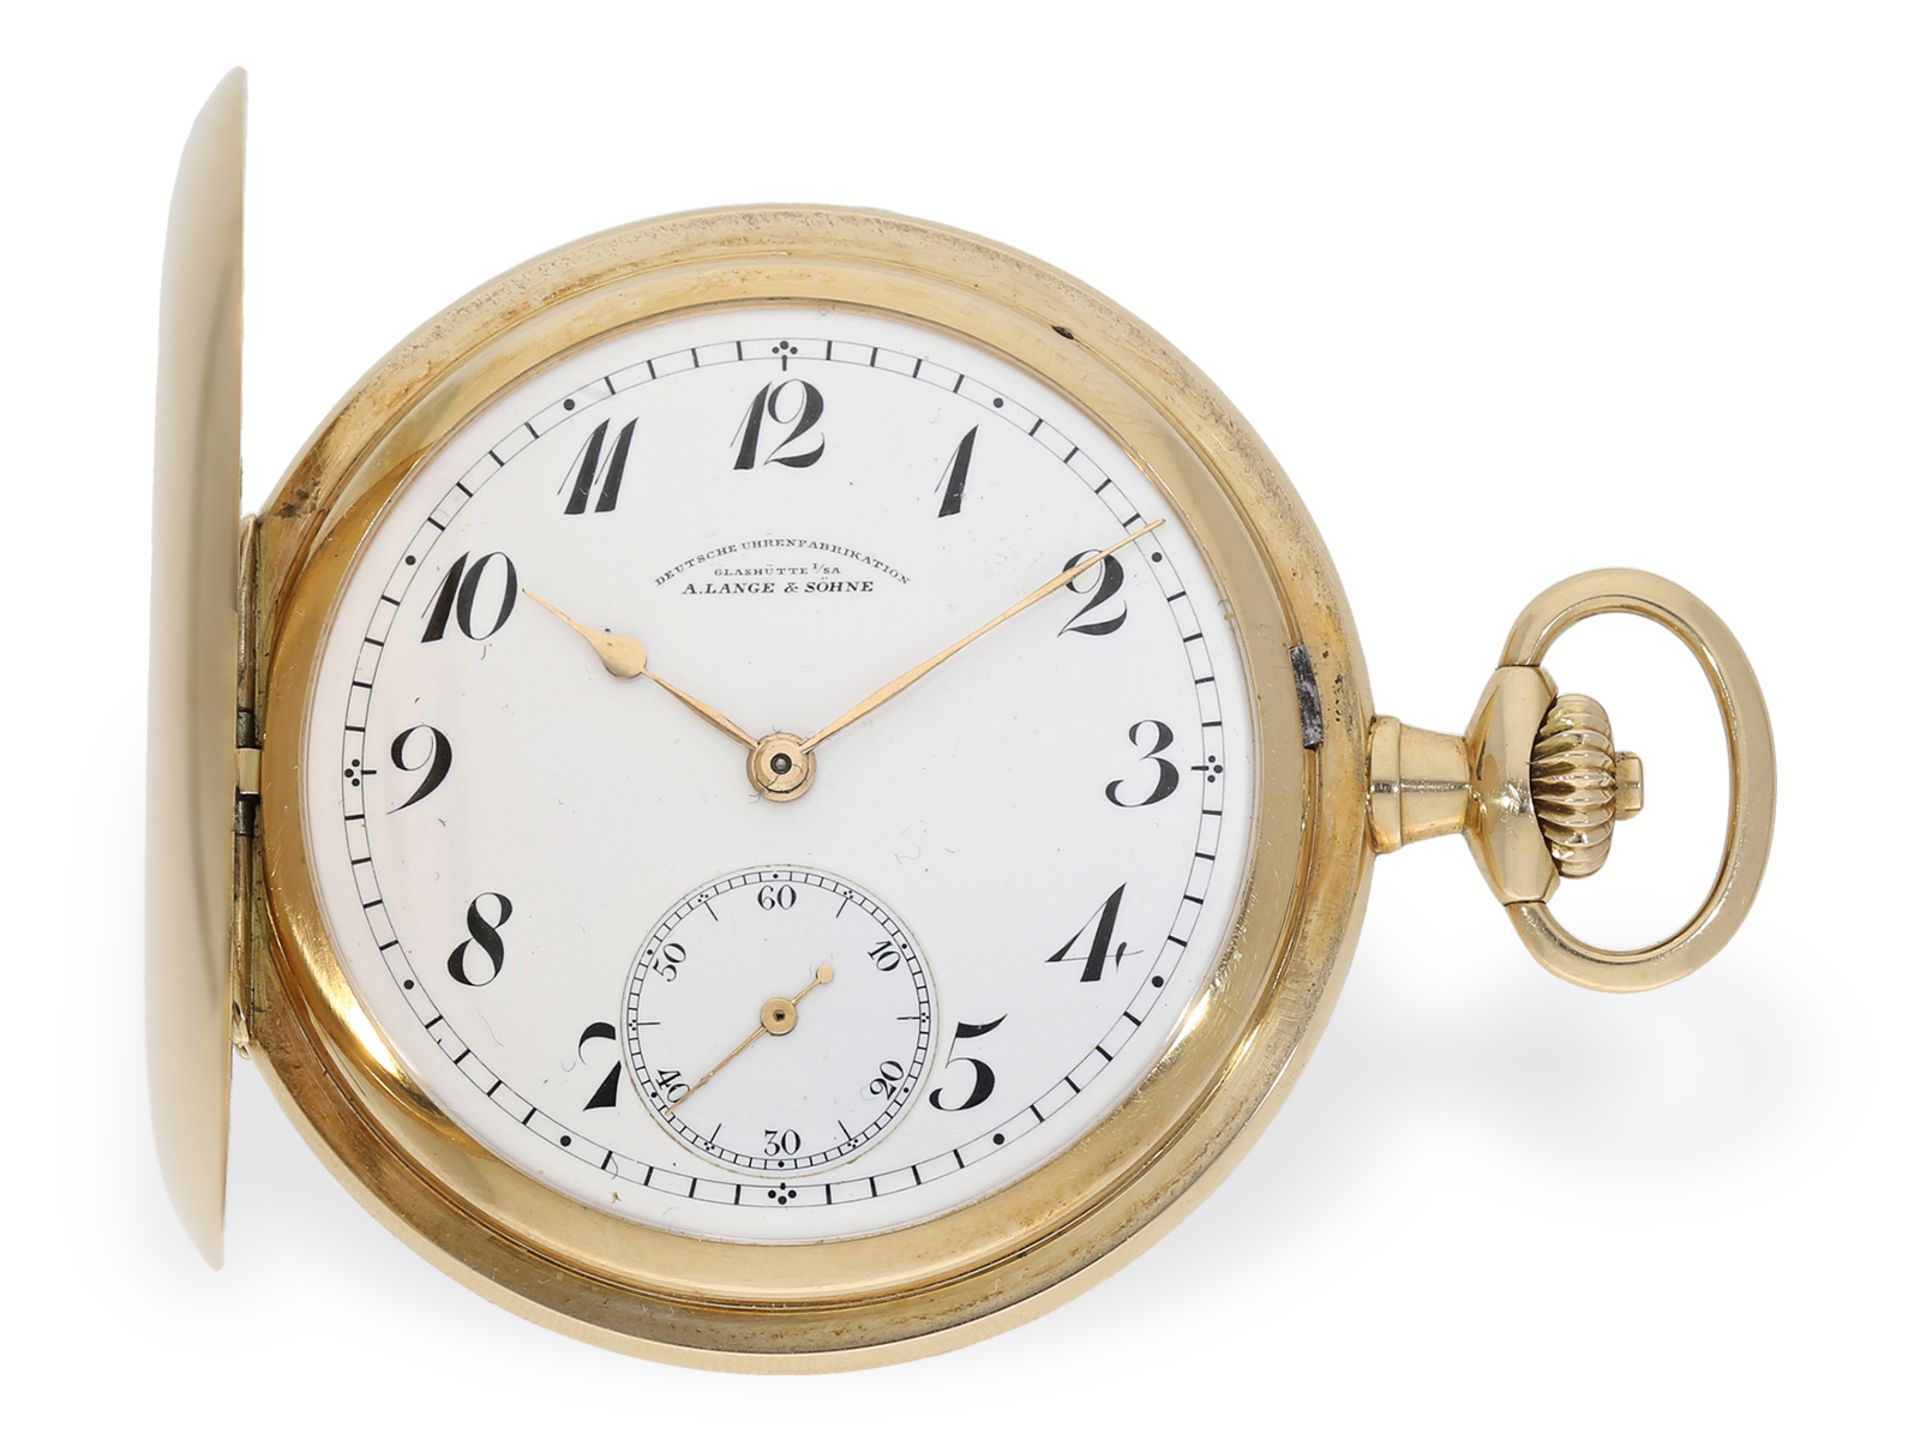 Pocket watch: very well preserved A. Lange & Söhne gold hunting case watch from 1926, collector's wa